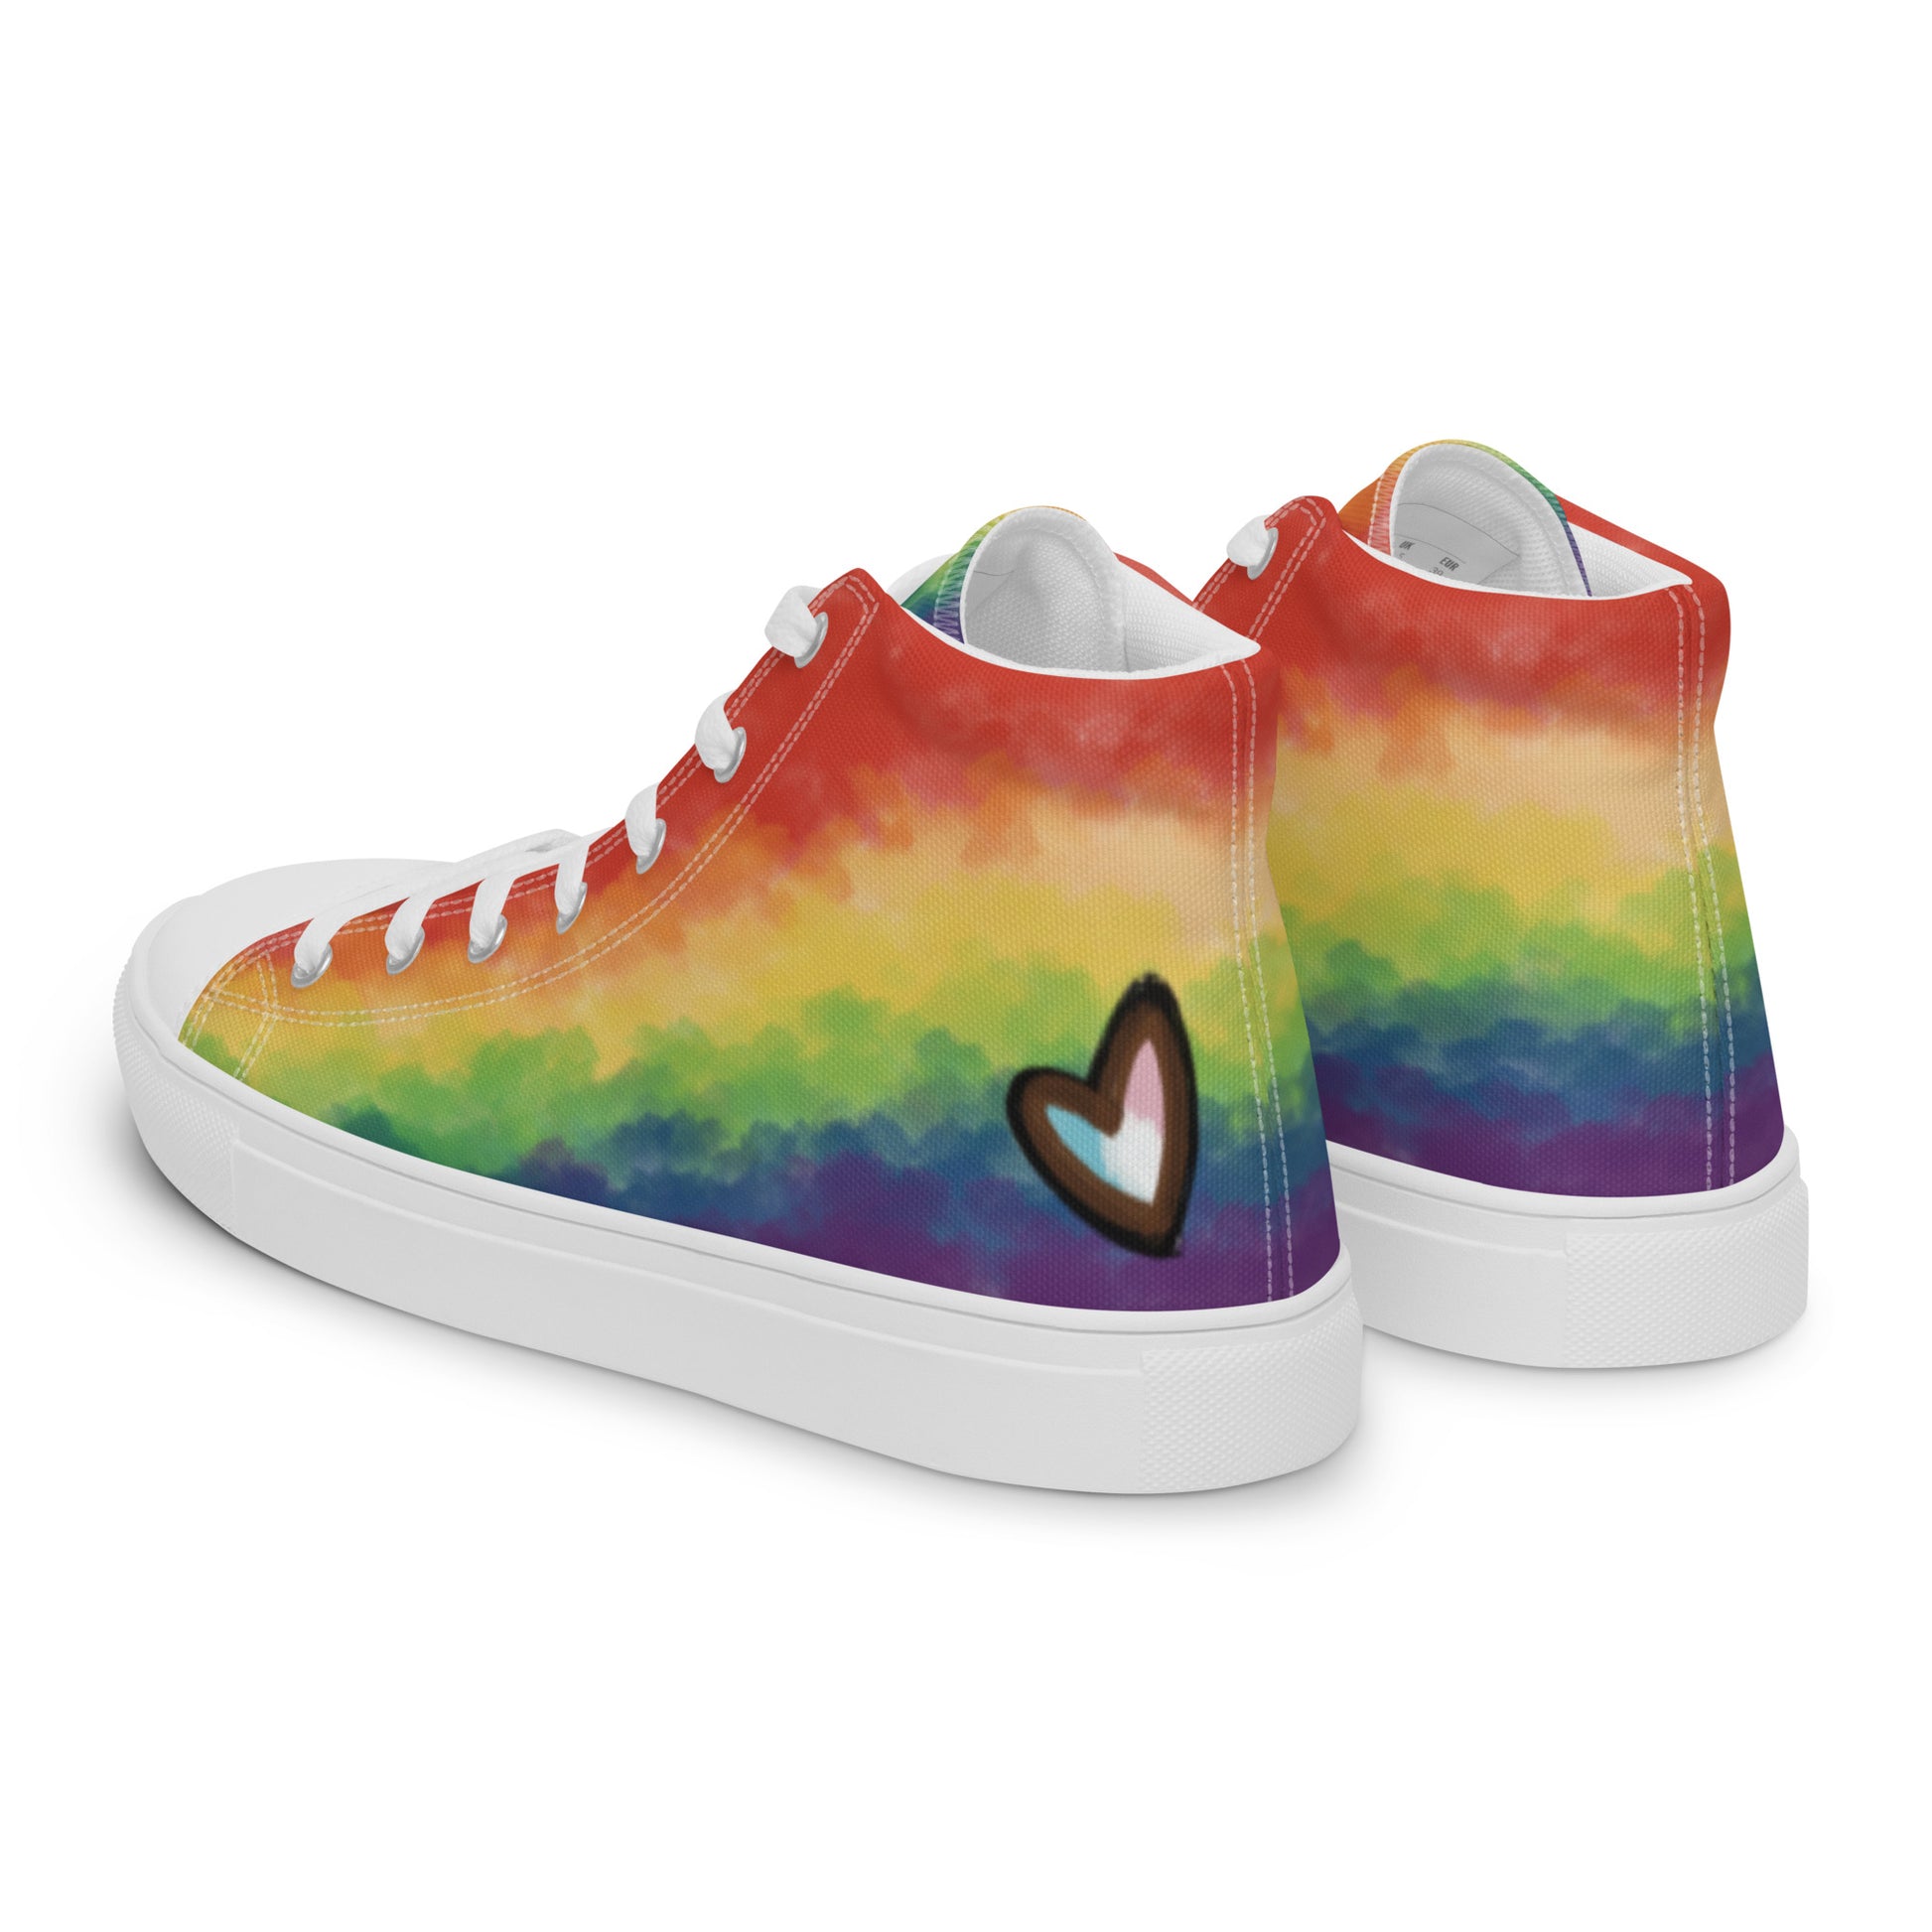 Left back view: A pair of high top shoes with rainbow striped clouds on the sides and a double heart in black and brown with the trans flag colors inside.